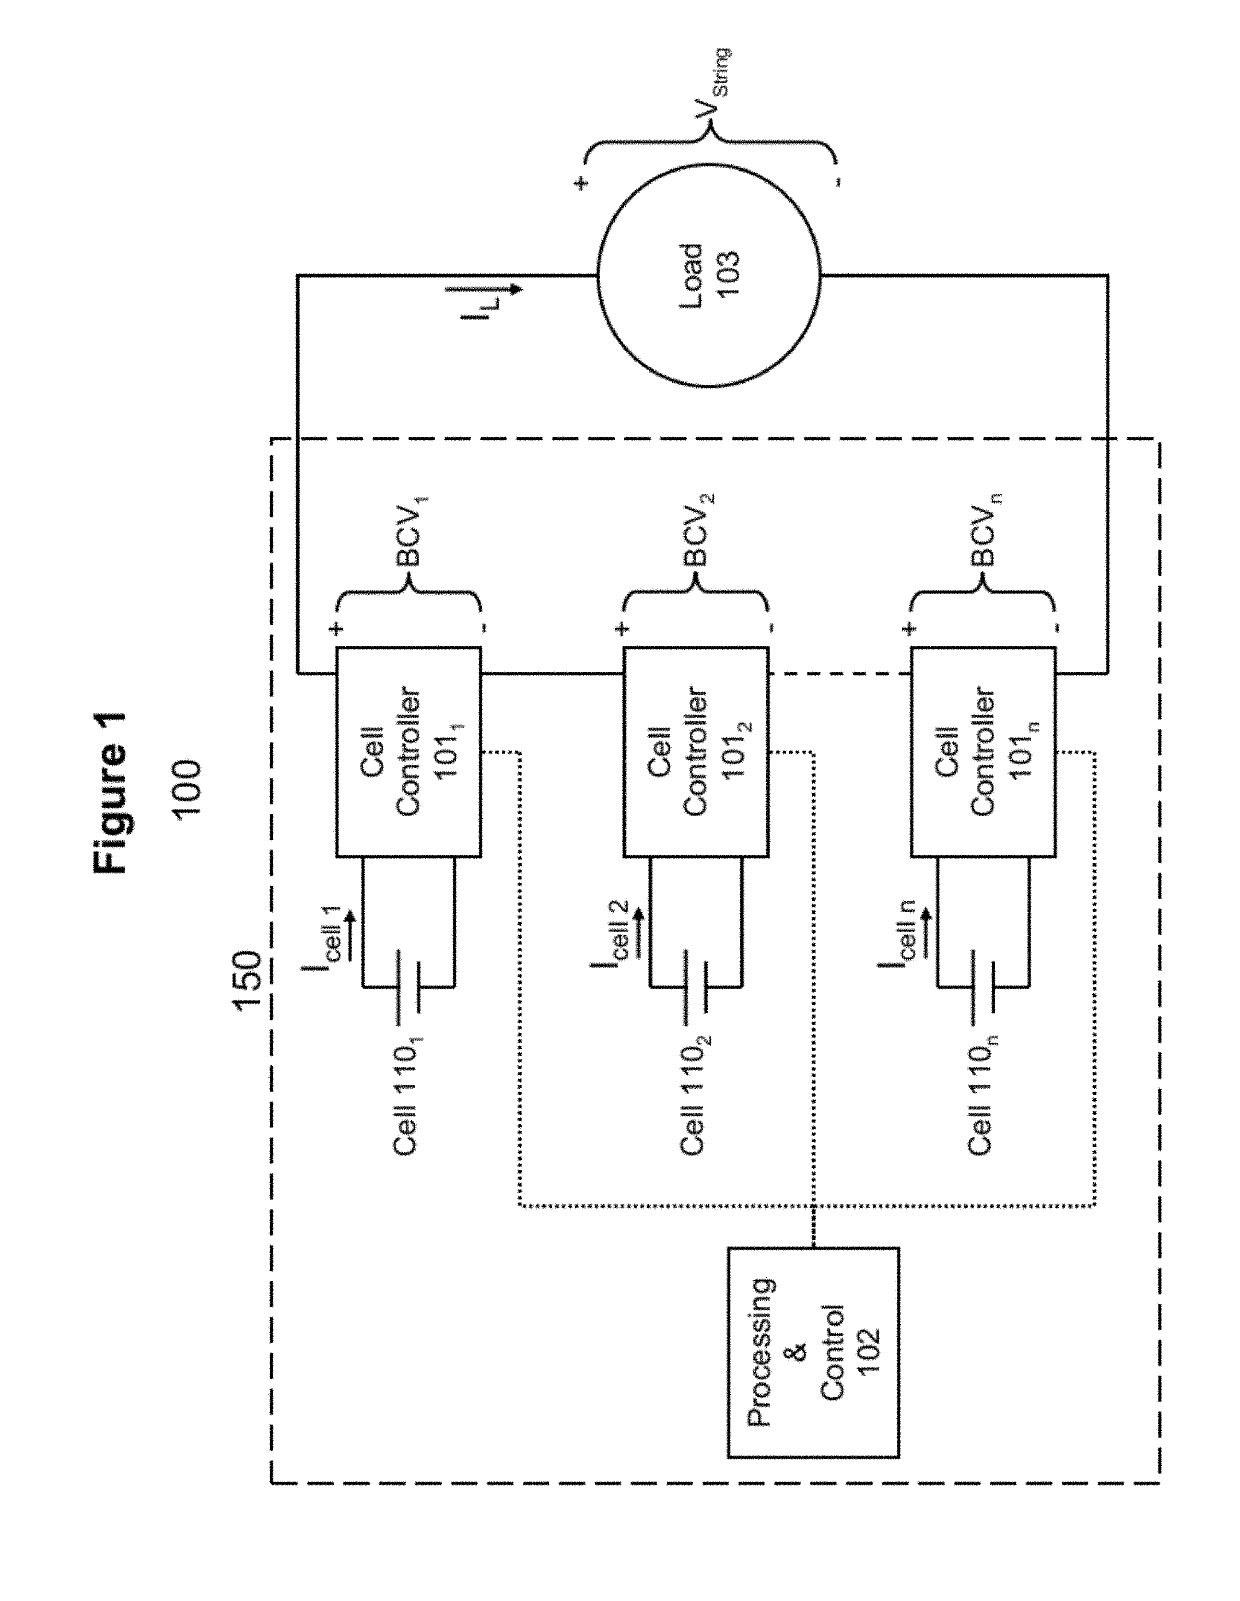 Systems and methods for intelligent, adaptive management of energy storage packs